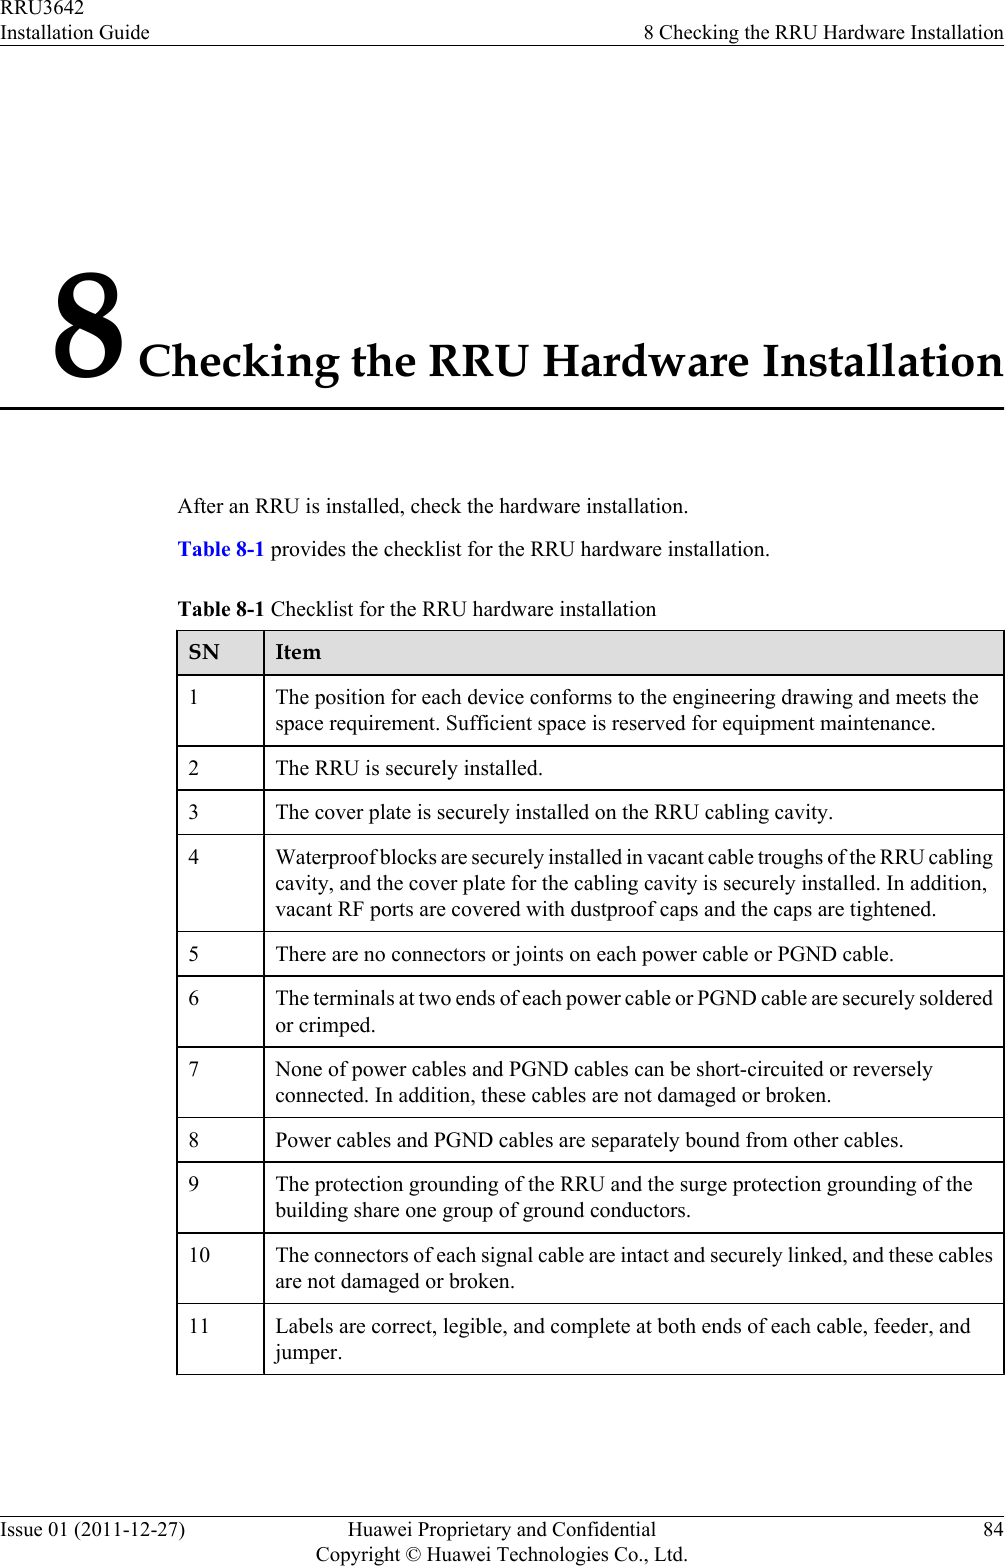 8 Checking the RRU Hardware InstallationAfter an RRU is installed, check the hardware installation.Table 8-1 provides the checklist for the RRU hardware installation.Table 8-1 Checklist for the RRU hardware installationSN Item1The position for each device conforms to the engineering drawing and meets thespace requirement. Sufficient space is reserved for equipment maintenance.2 The RRU is securely installed.3 The cover plate is securely installed on the RRU cabling cavity.4 Waterproof blocks are securely installed in vacant cable troughs of the RRU cablingcavity, and the cover plate for the cabling cavity is securely installed. In addition,vacant RF ports are covered with dustproof caps and the caps are tightened.5 There are no connectors or joints on each power cable or PGND cable.6 The terminals at two ends of each power cable or PGND cable are securely solderedor crimped.7 None of power cables and PGND cables can be short-circuited or reverselyconnected. In addition, these cables are not damaged or broken.8 Power cables and PGND cables are separately bound from other cables.9 The protection grounding of the RRU and the surge protection grounding of thebuilding share one group of ground conductors.10 The connectors of each signal cable are intact and securely linked, and these cablesare not damaged or broken.11 Labels are correct, legible, and complete at both ends of each cable, feeder, andjumper.RRU3642Installation Guide 8 Checking the RRU Hardware InstallationIssue 01 (2011-12-27) Huawei Proprietary and ConfidentialCopyright © Huawei Technologies Co., Ltd.84